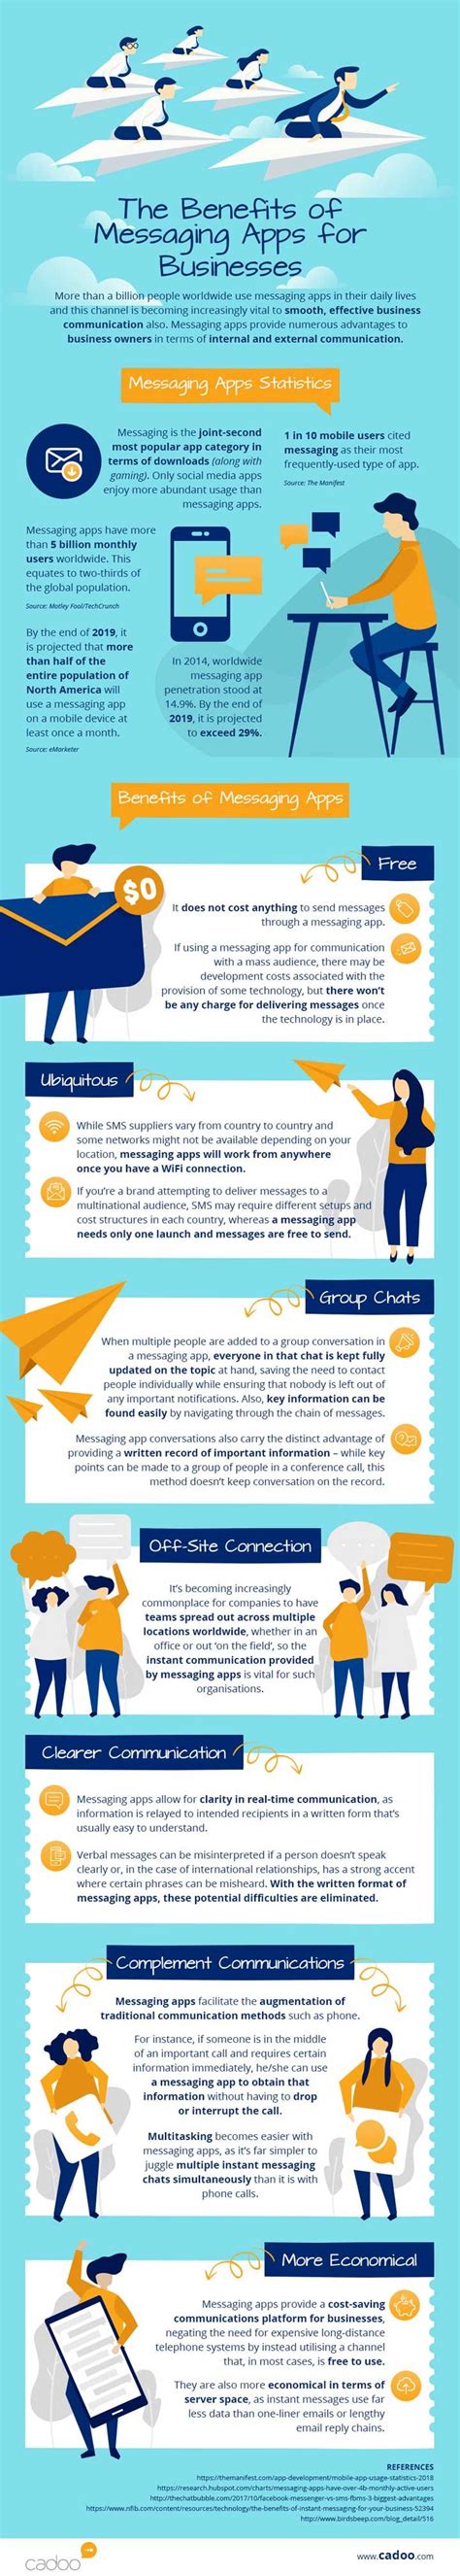 The Benefits Of Instant Messaging Apps For Business Infographic